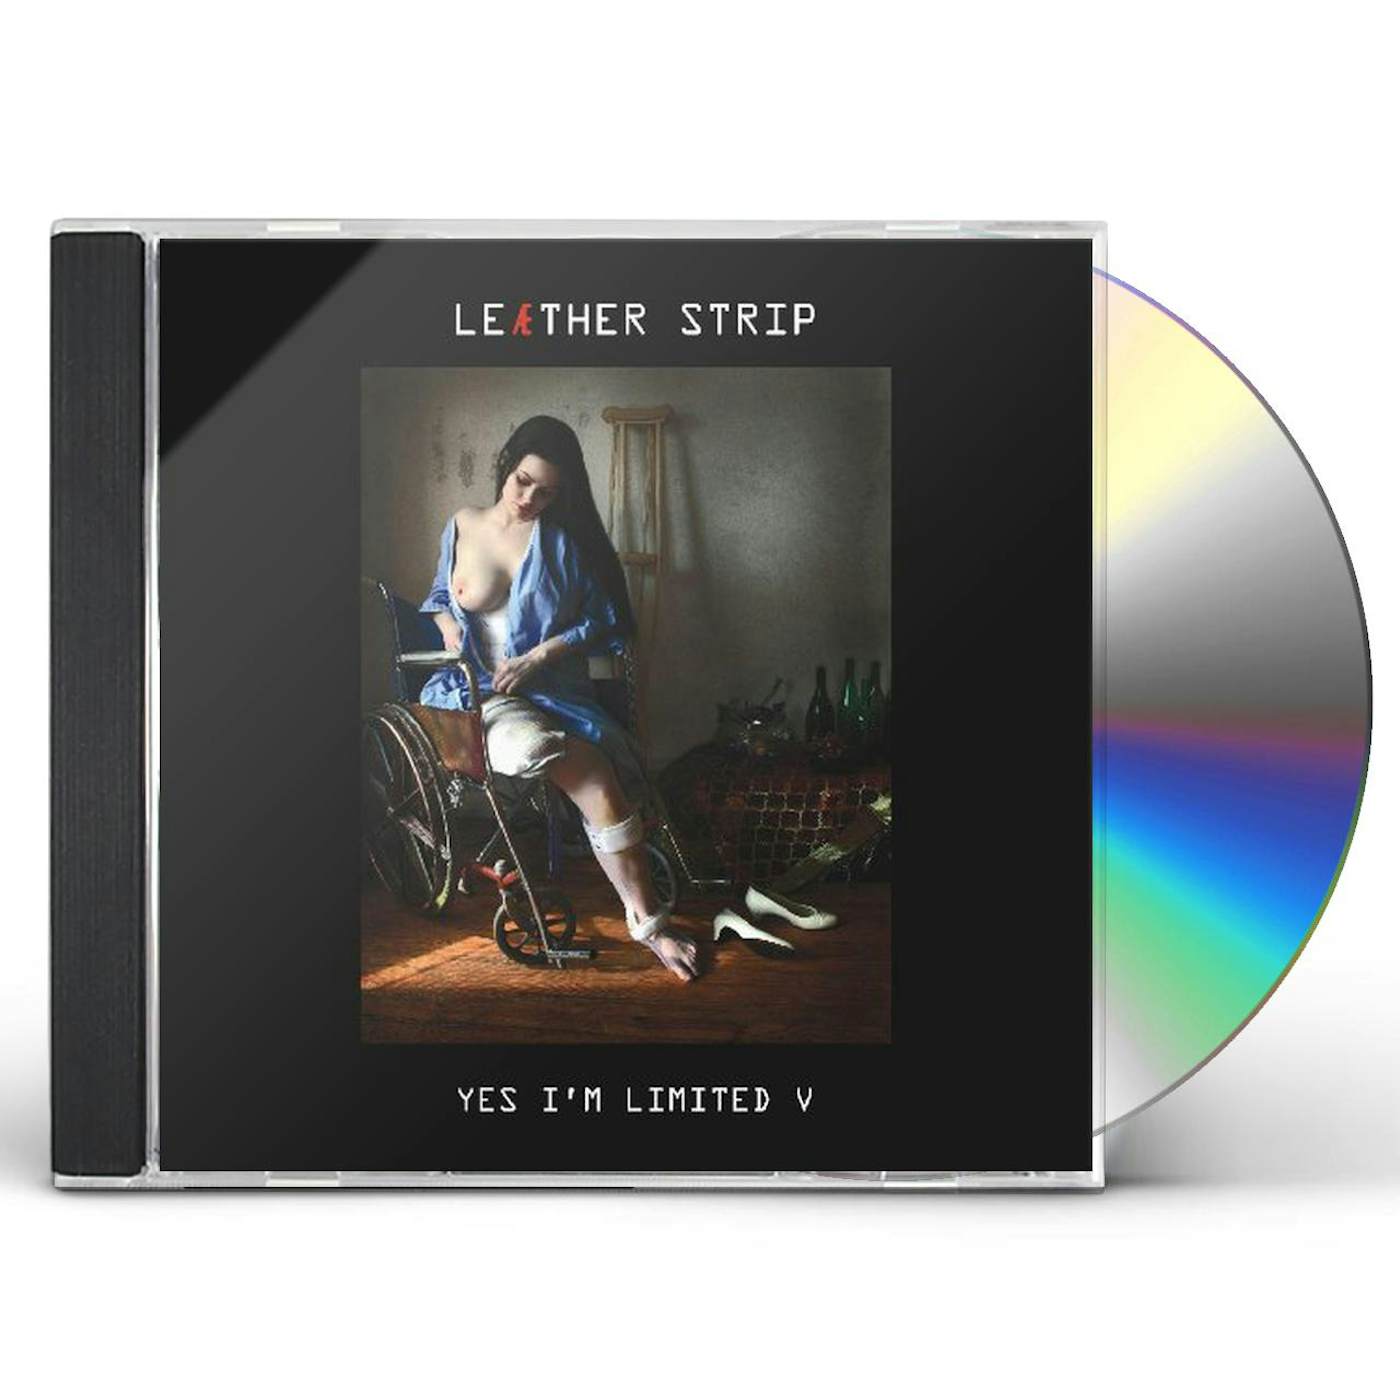 Leaether Strip YES I'M LIMITED 5 CD